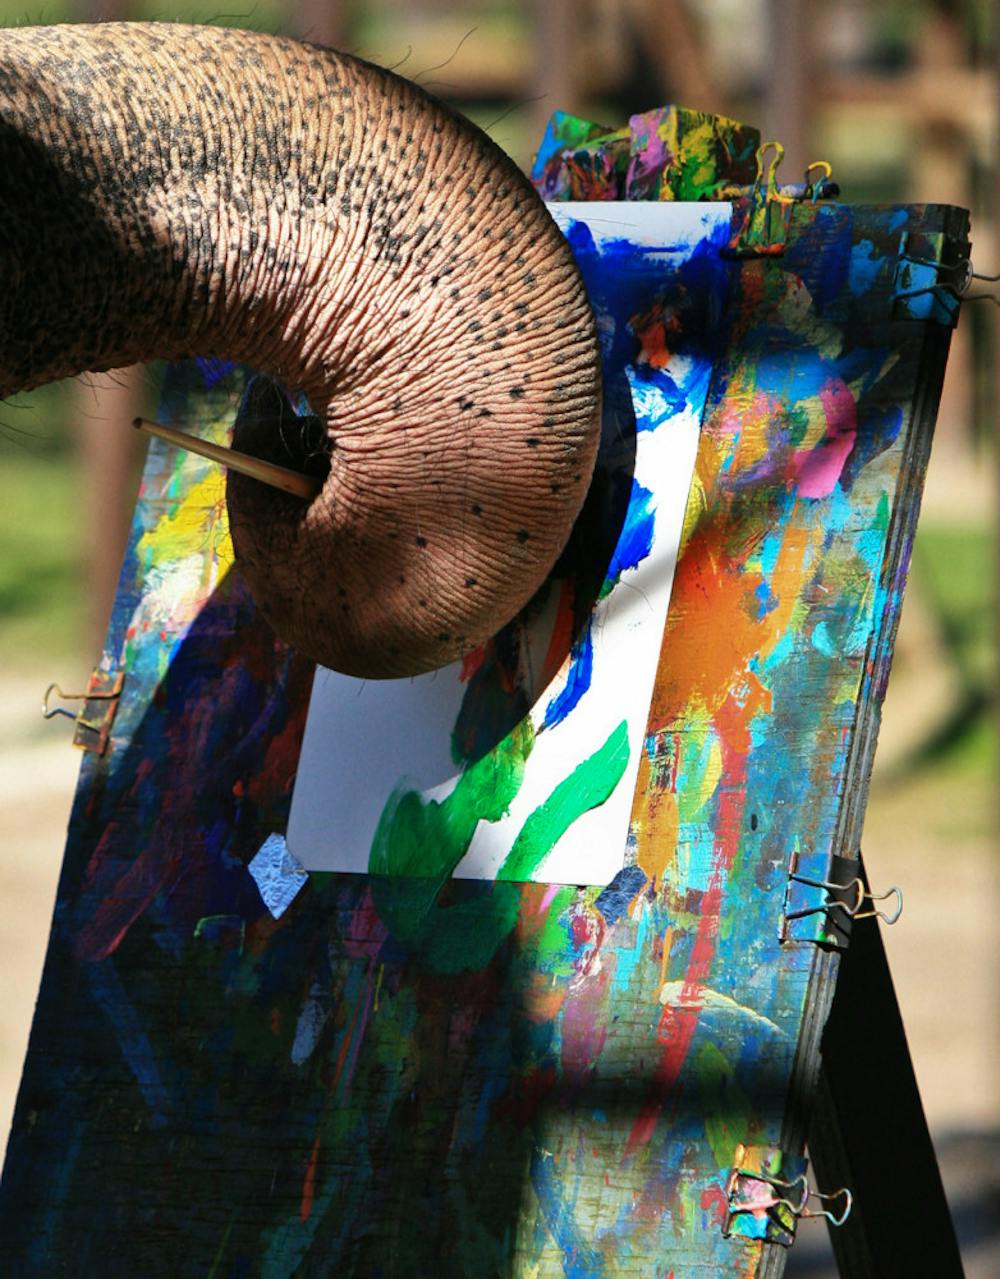 <p>Luke, a 28-year-old Asian elephant, paints a picture for the audience at Two Tails Ranch located in Williston, Florida. The ranch is owned by Patricia Zerbini, 47, who has dedicated her life to training the elephants and studying exotic animals.</p>